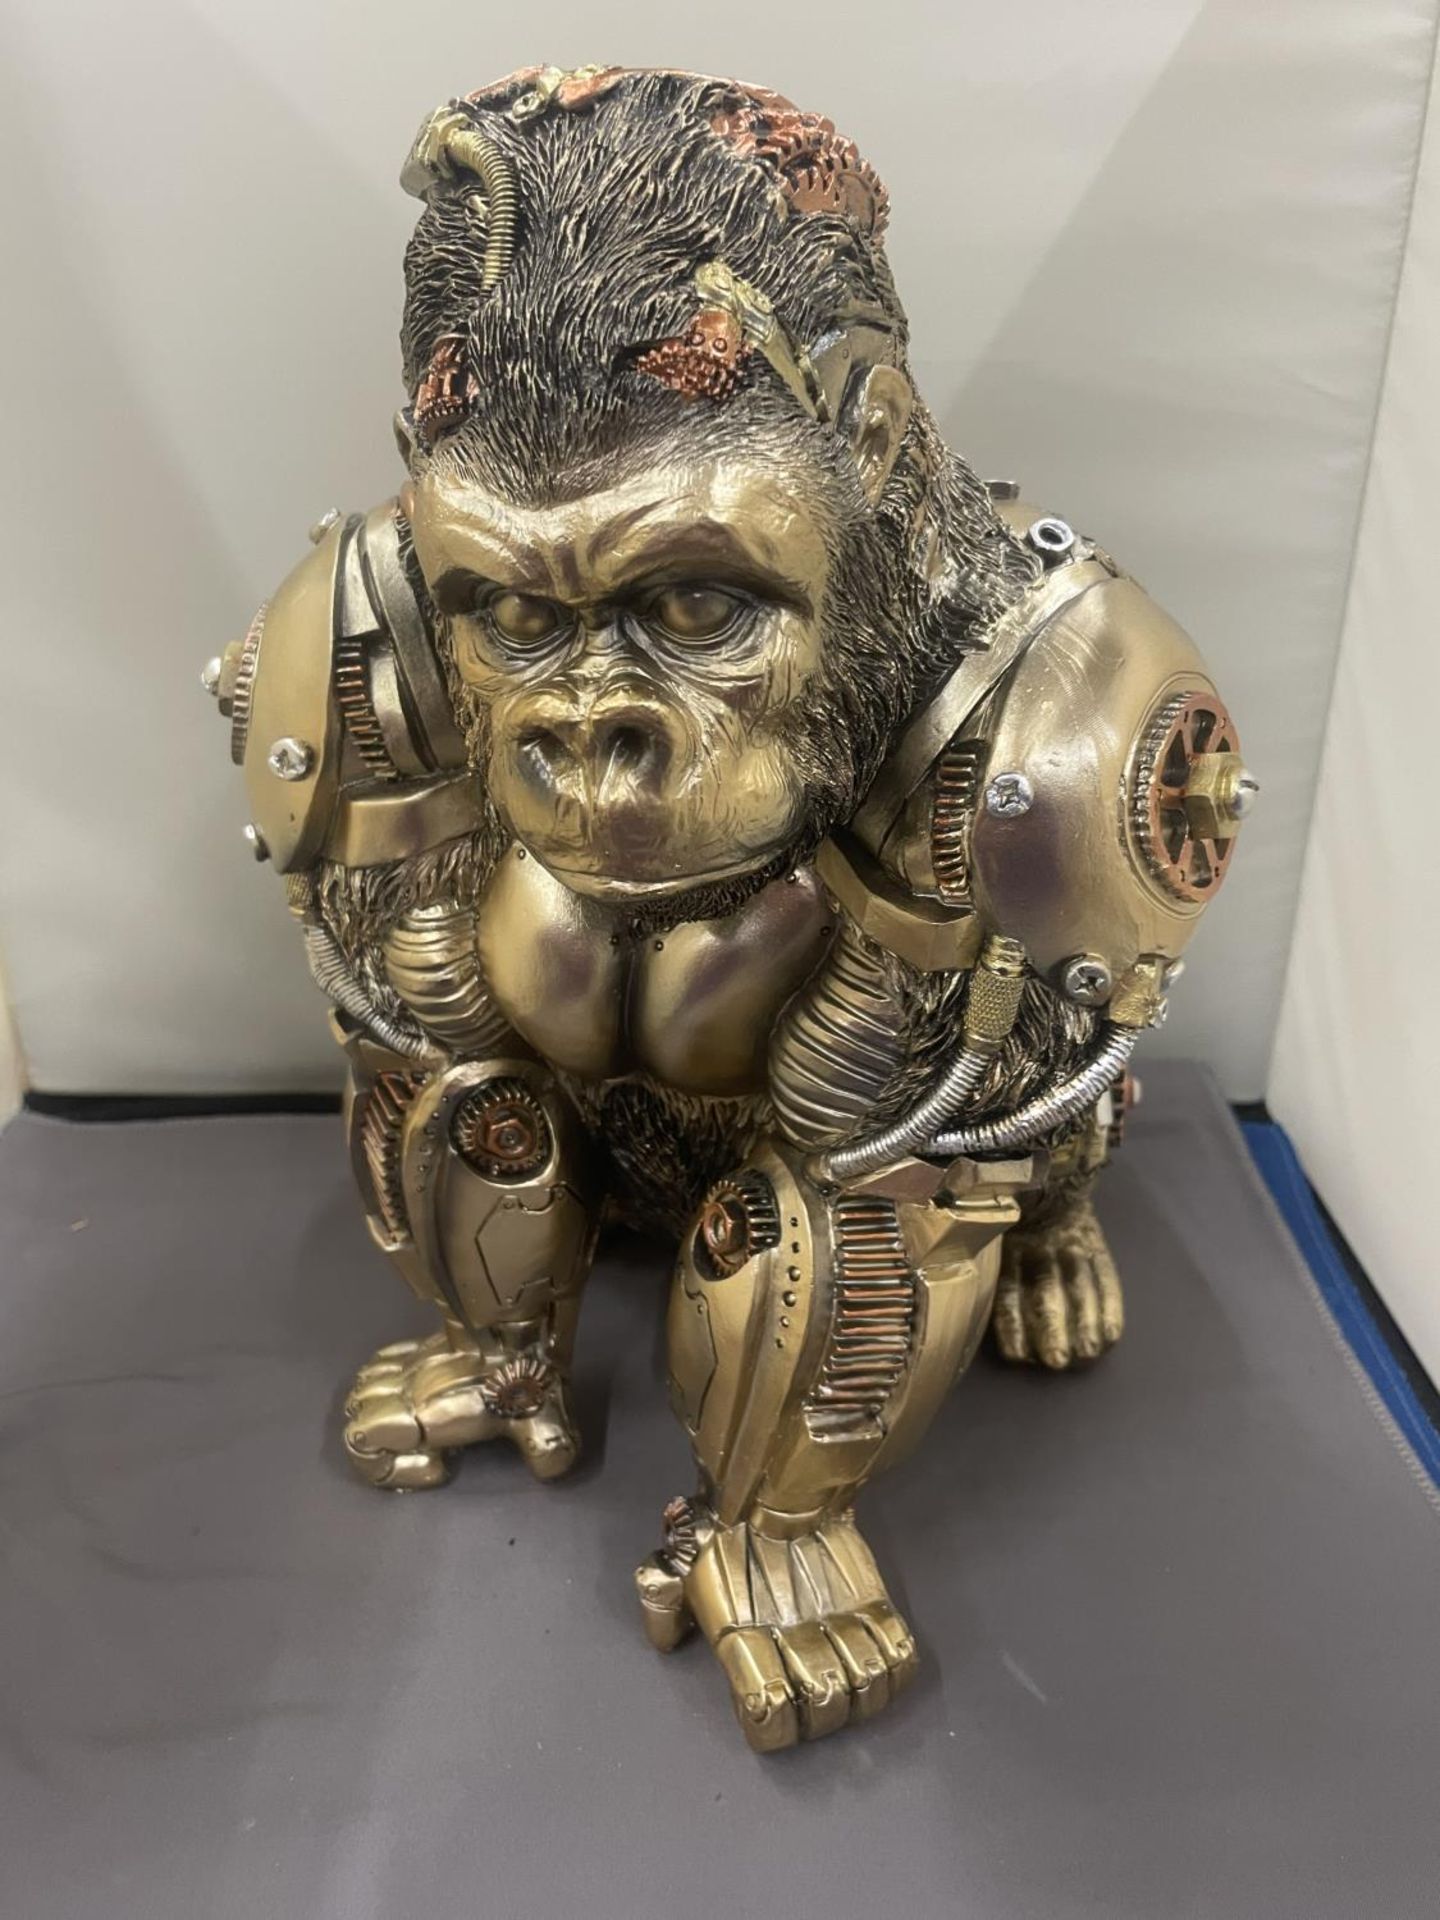 A STEAM PUNK STYLE GORILLA 28CM TALL - Image 2 of 7